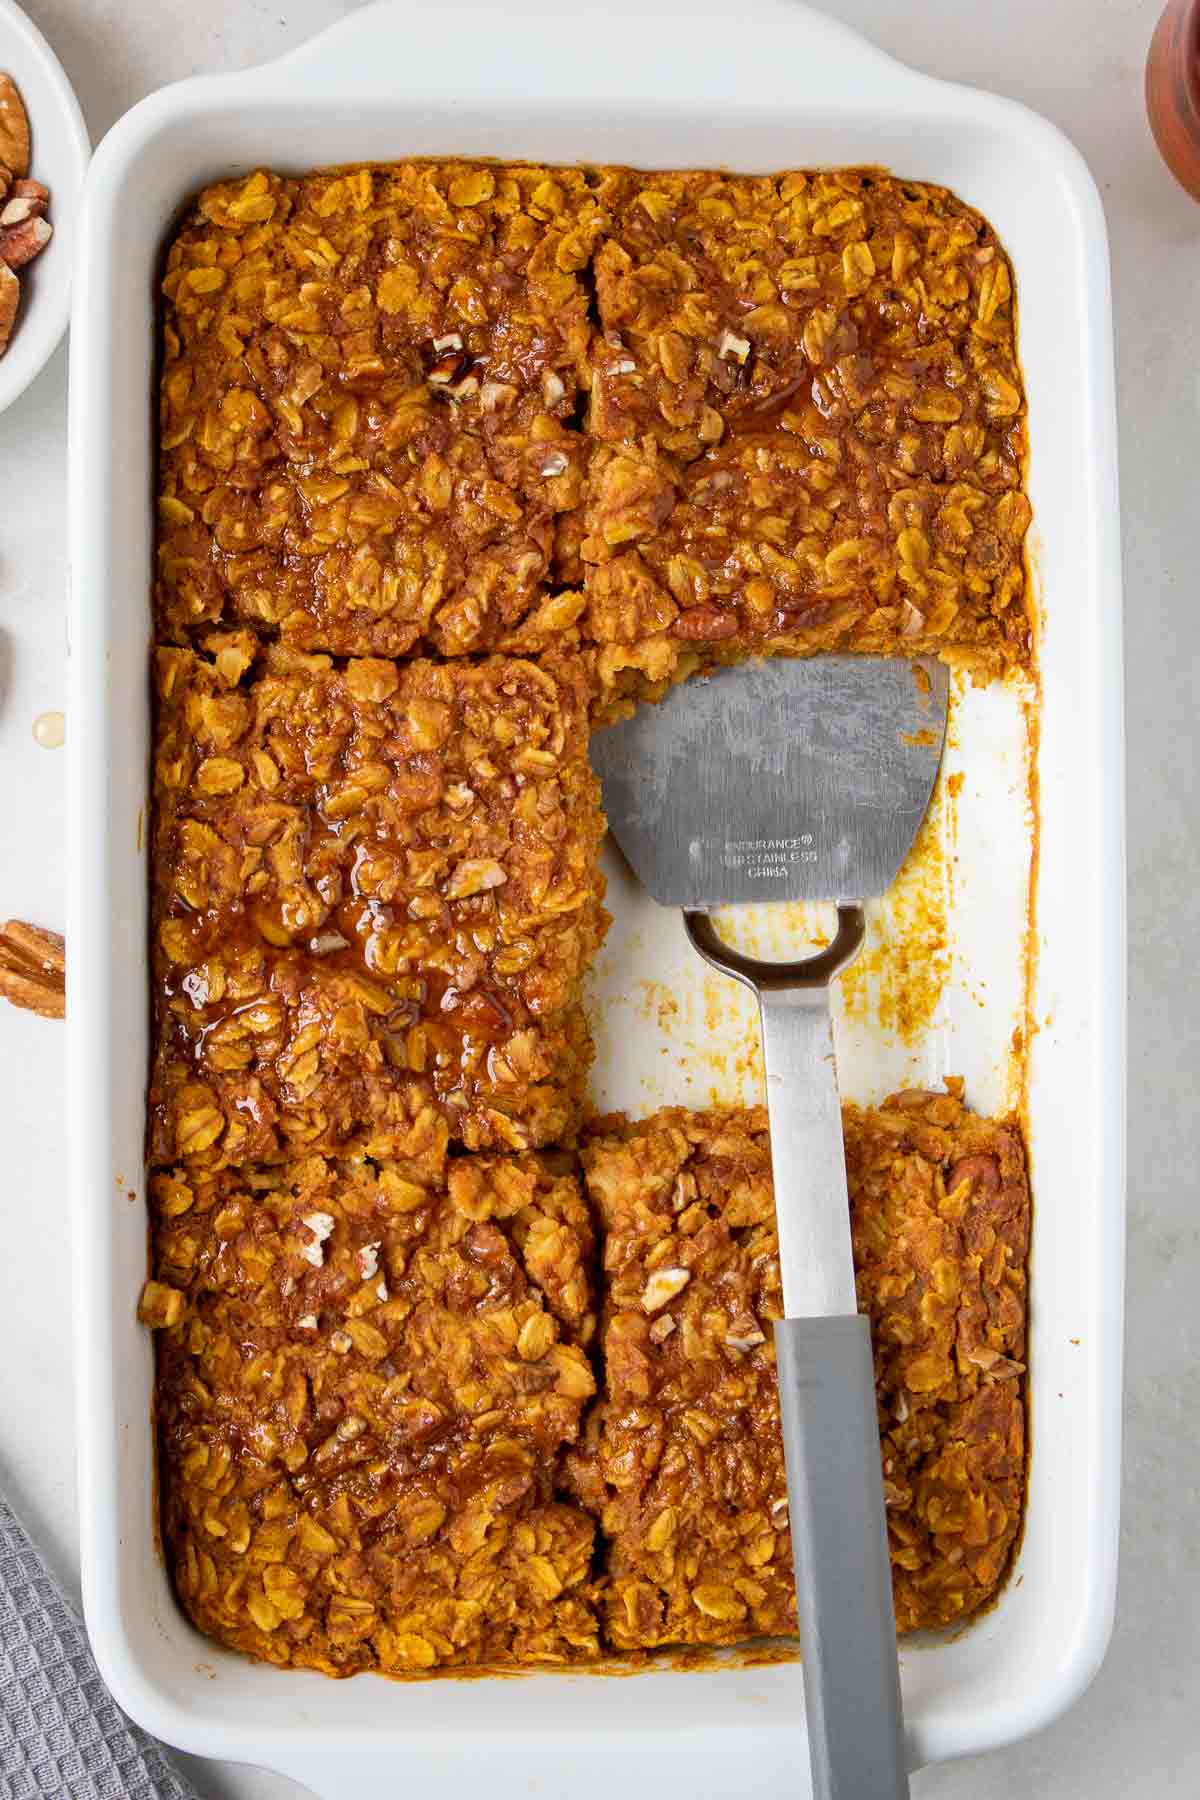 Pumpkin baked oatmeal in a white baking dish sliced into 6 pieces with maple syrup on top and a spatula on a white background